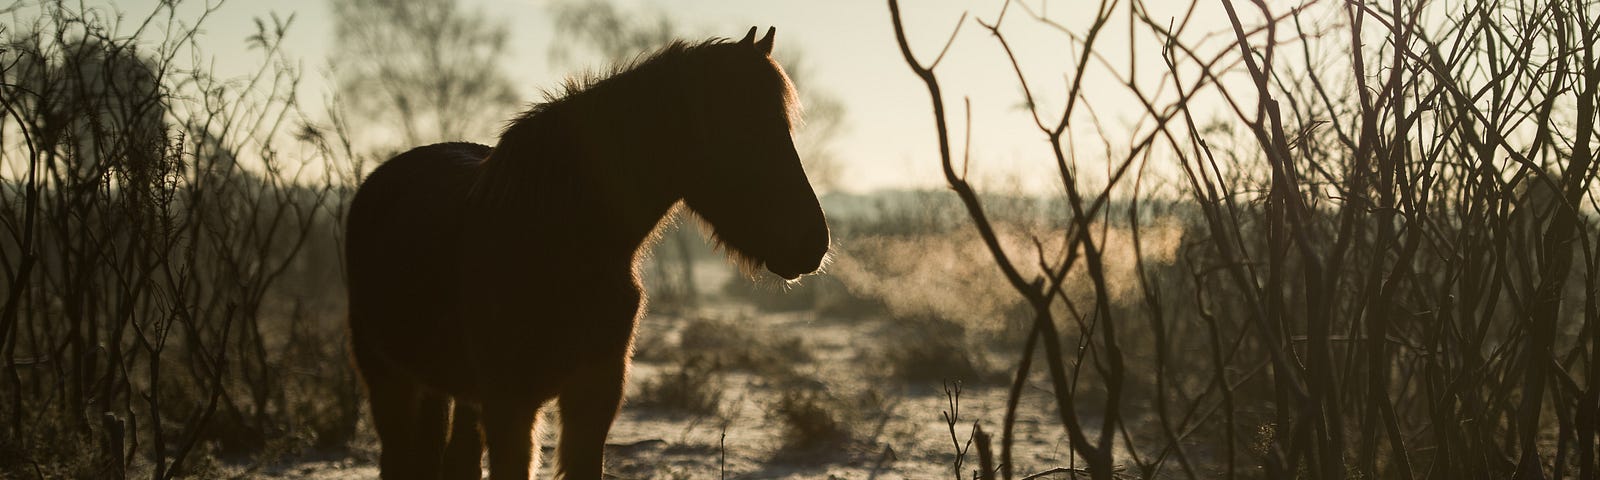 horse silhouette with barren bushes